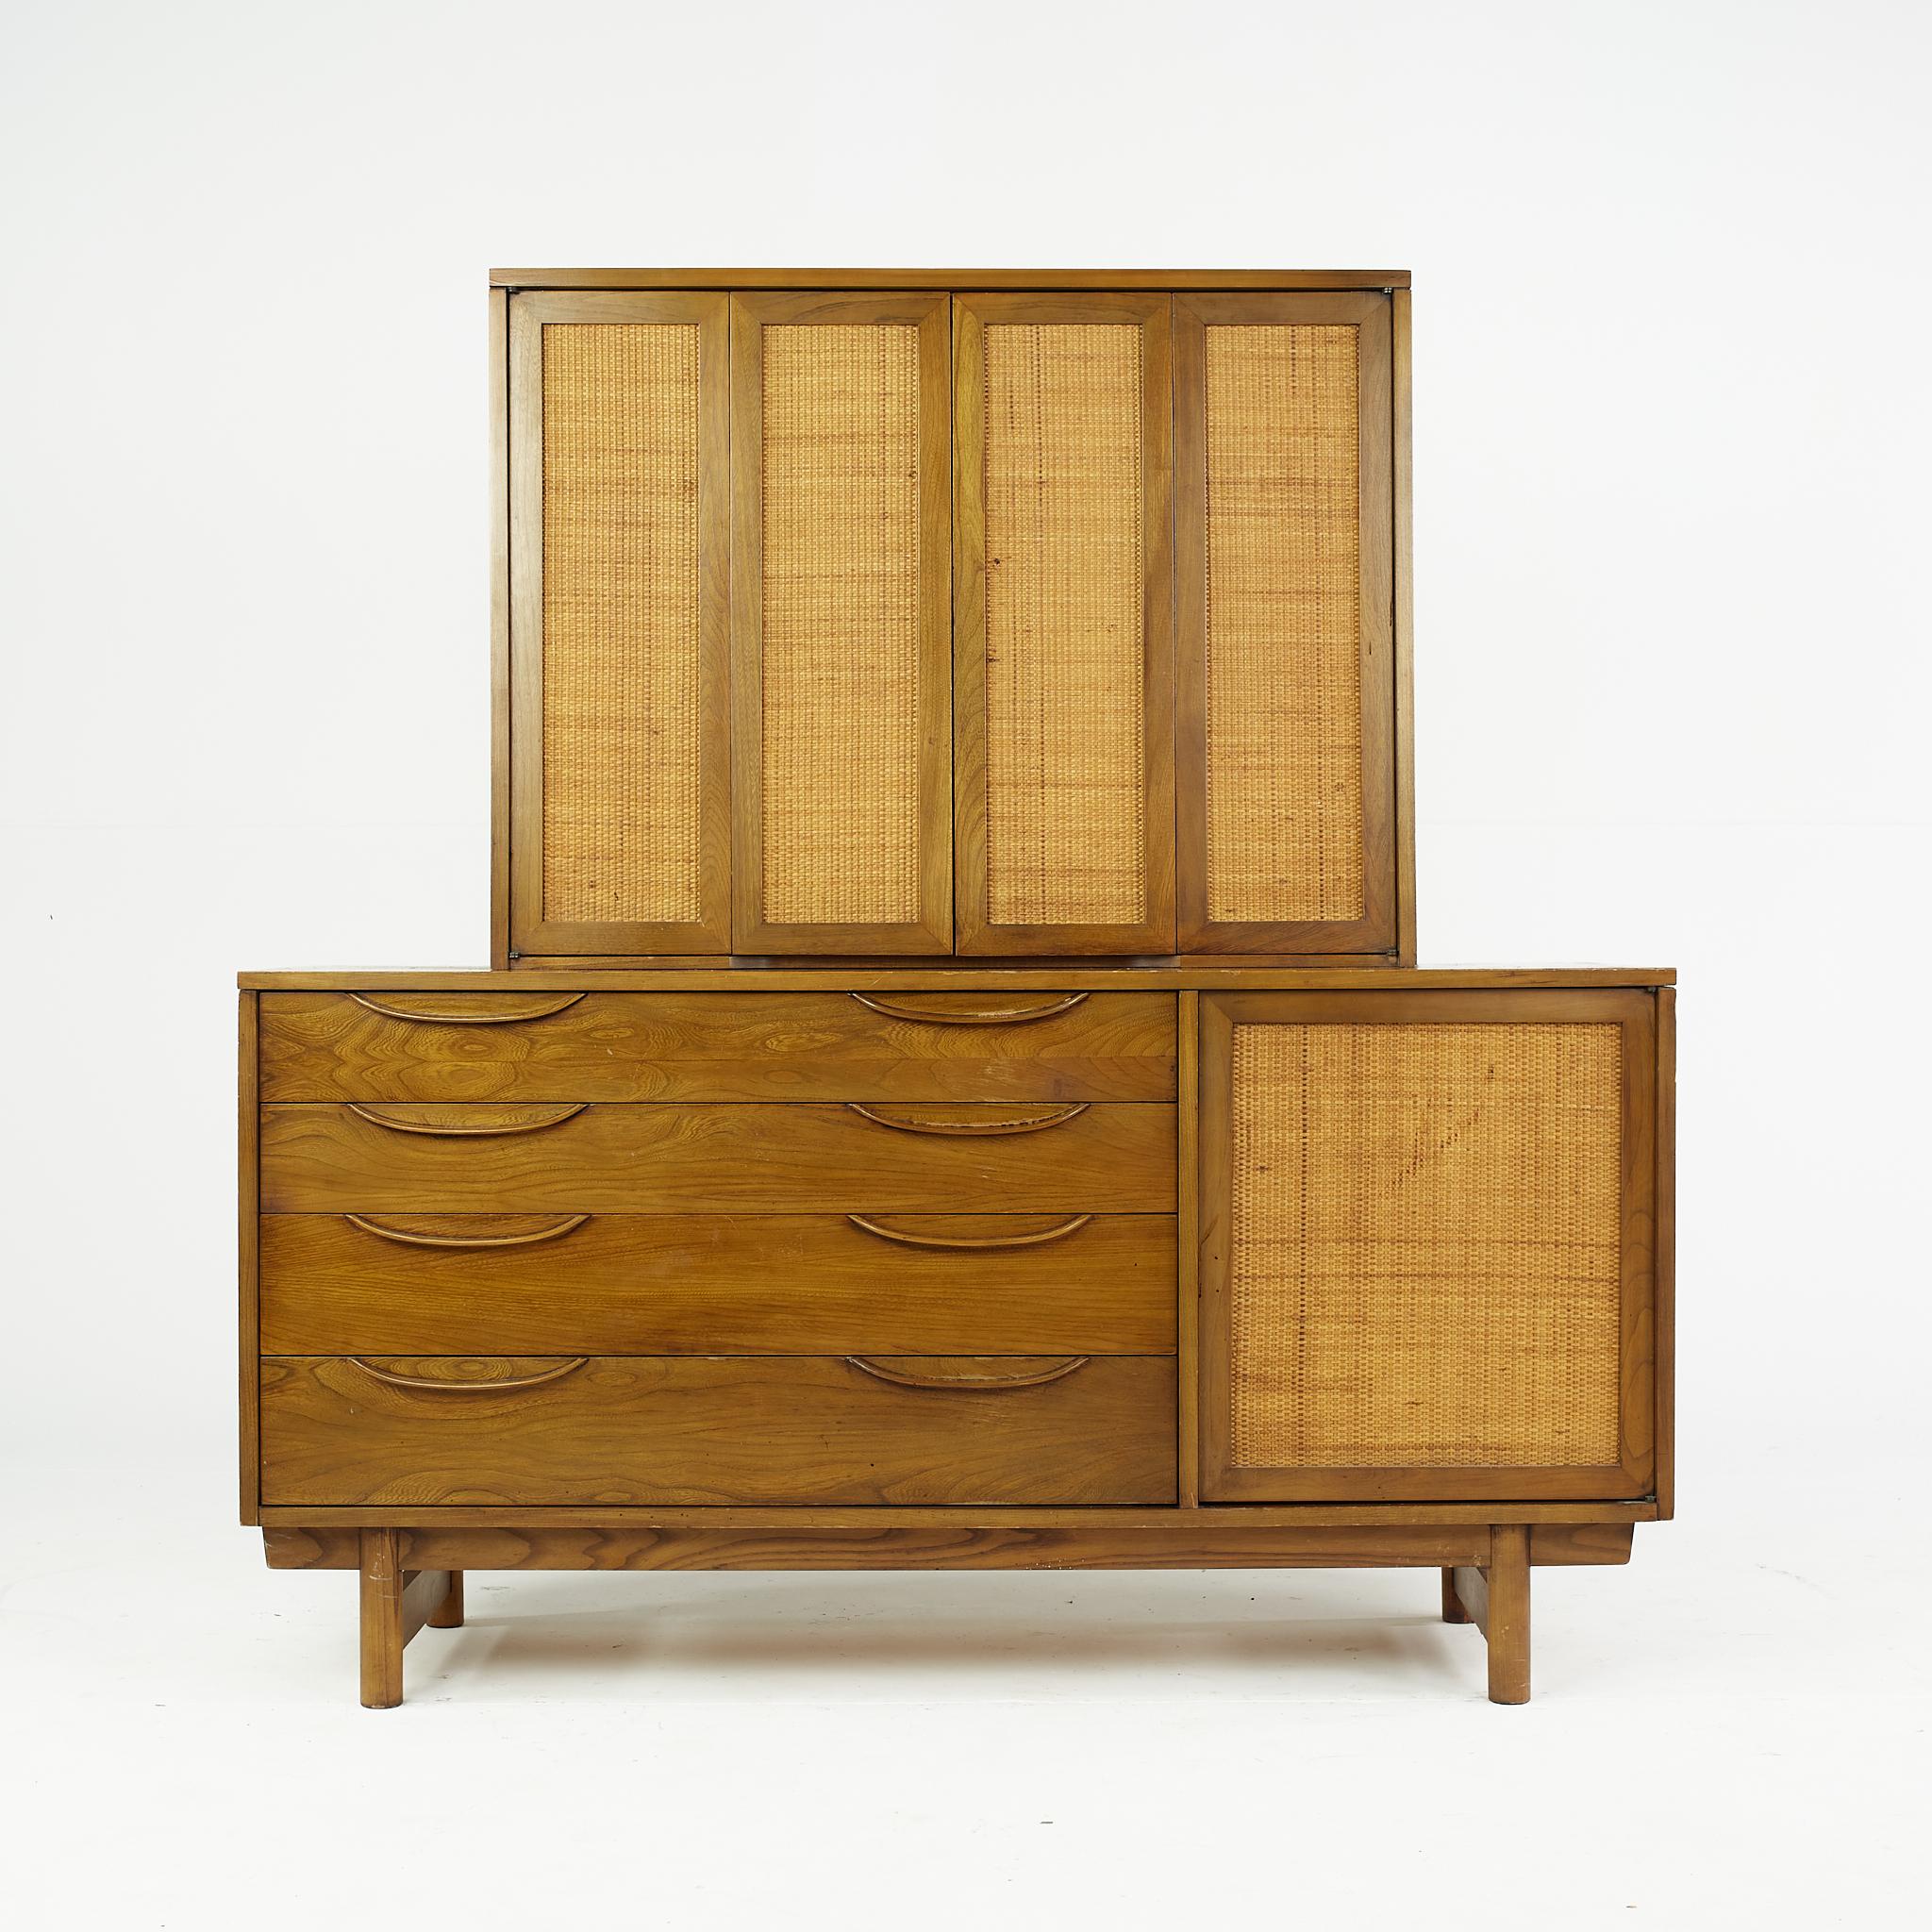 Lawrence Peabody mid-century cane front buffet and hutch.

The buffet measures: 58 wide x 19 deep x 30 inches high.
The hutch measures: 38 wide x 14 deep x 29 inches high, making a maximum total height of 59 inches.

All pieces of furniture can